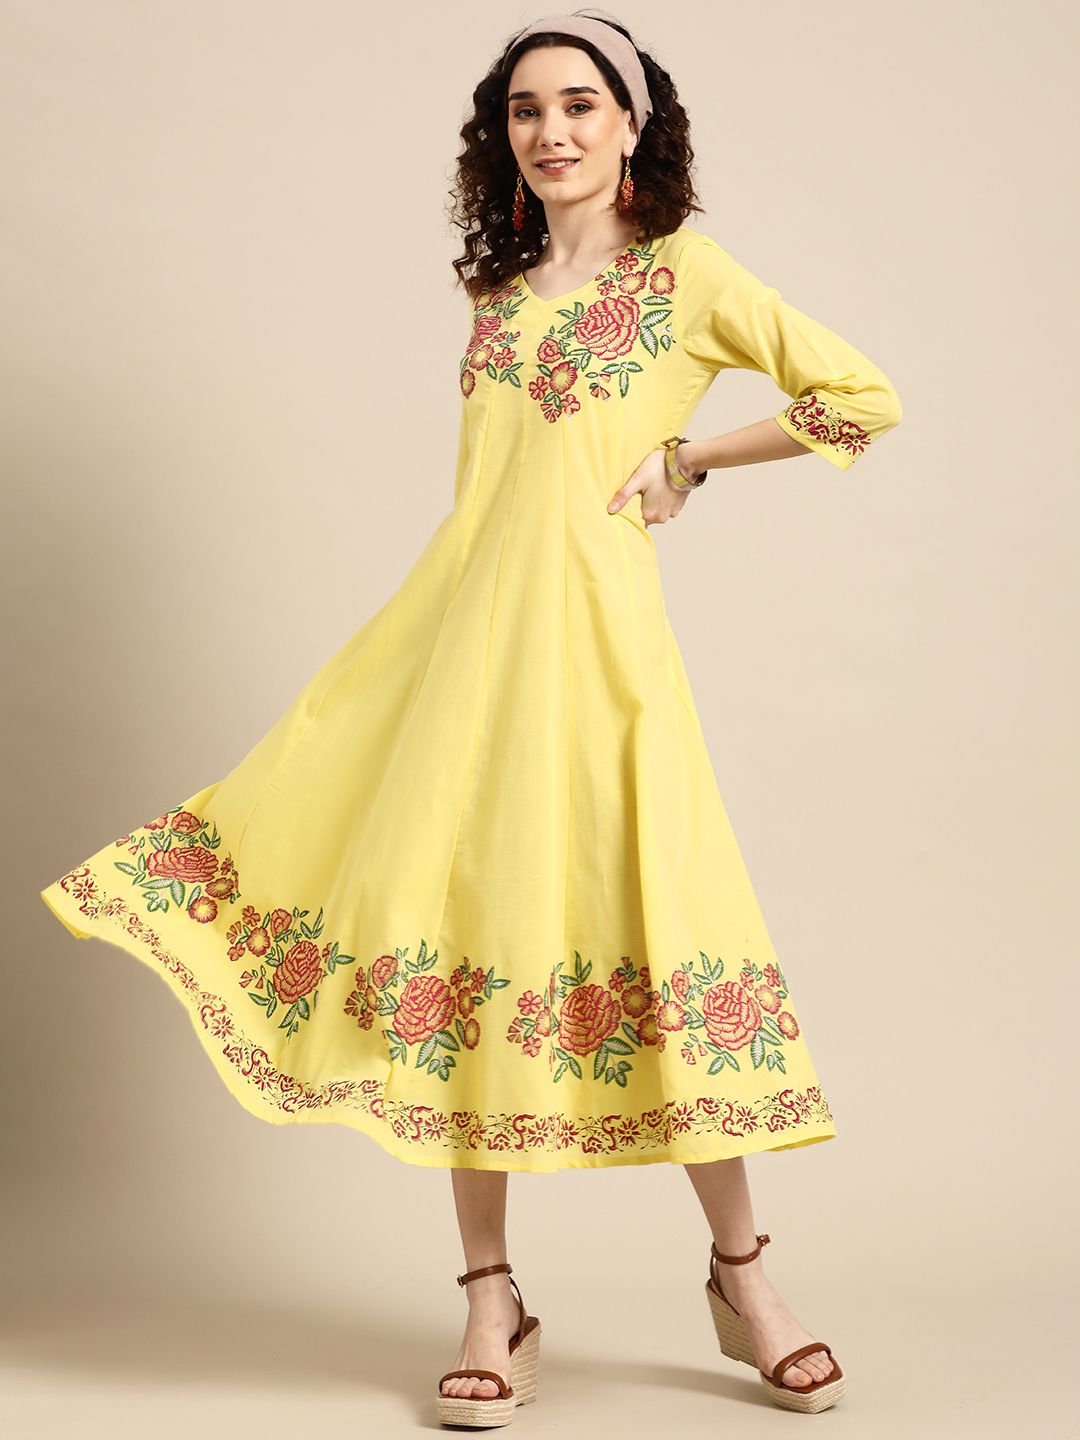 Sangria Yellow Floral Embroidered Ethnic Maxi Dress Price in India